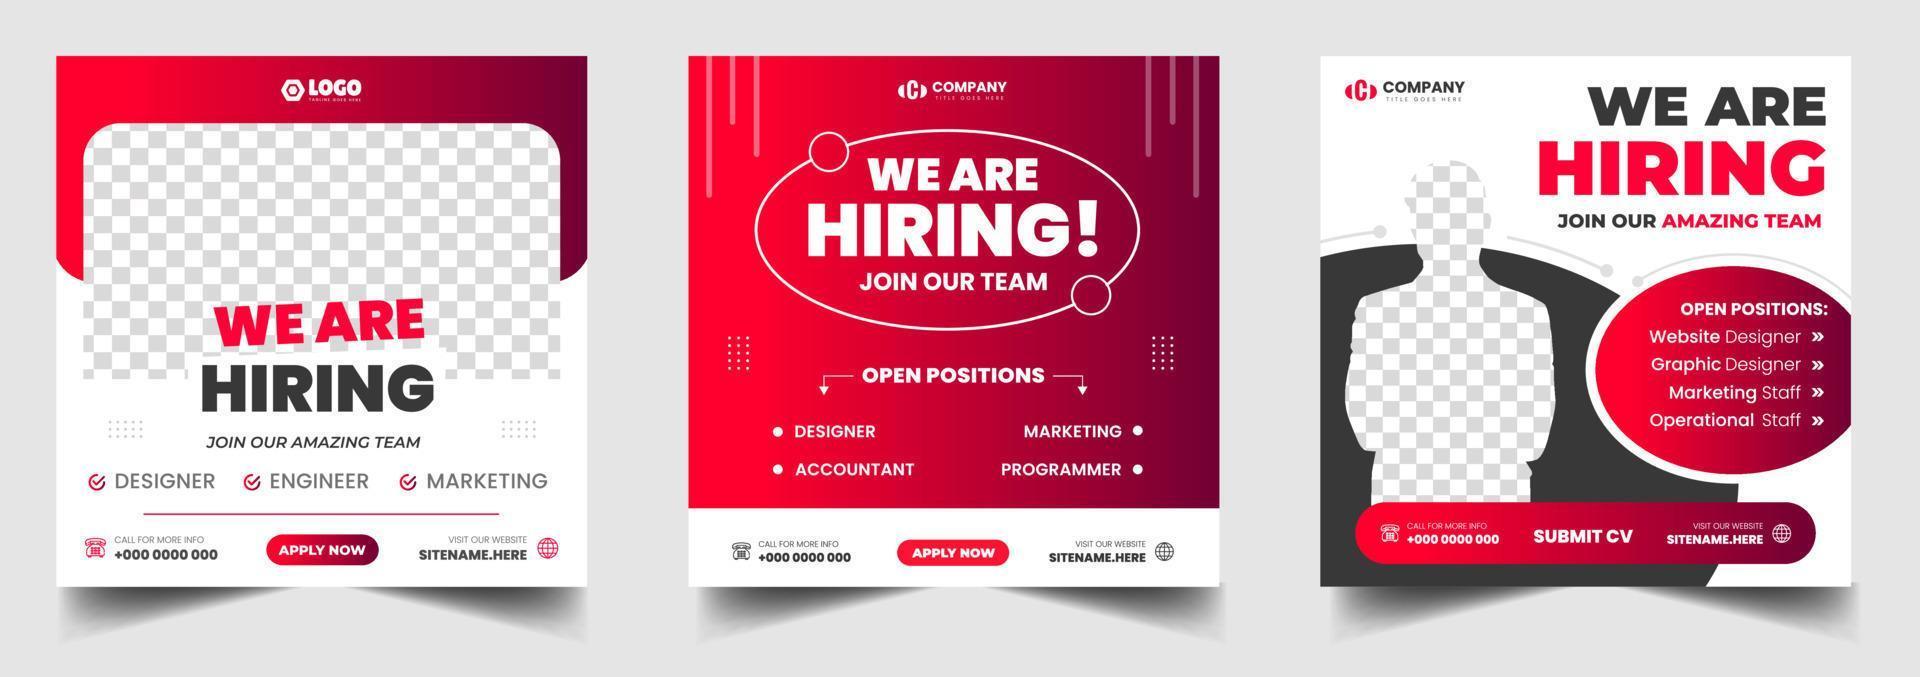 We are hiring job vacancy social media post banner design template with red color. We are hiring job vacancy square web banner design. vector